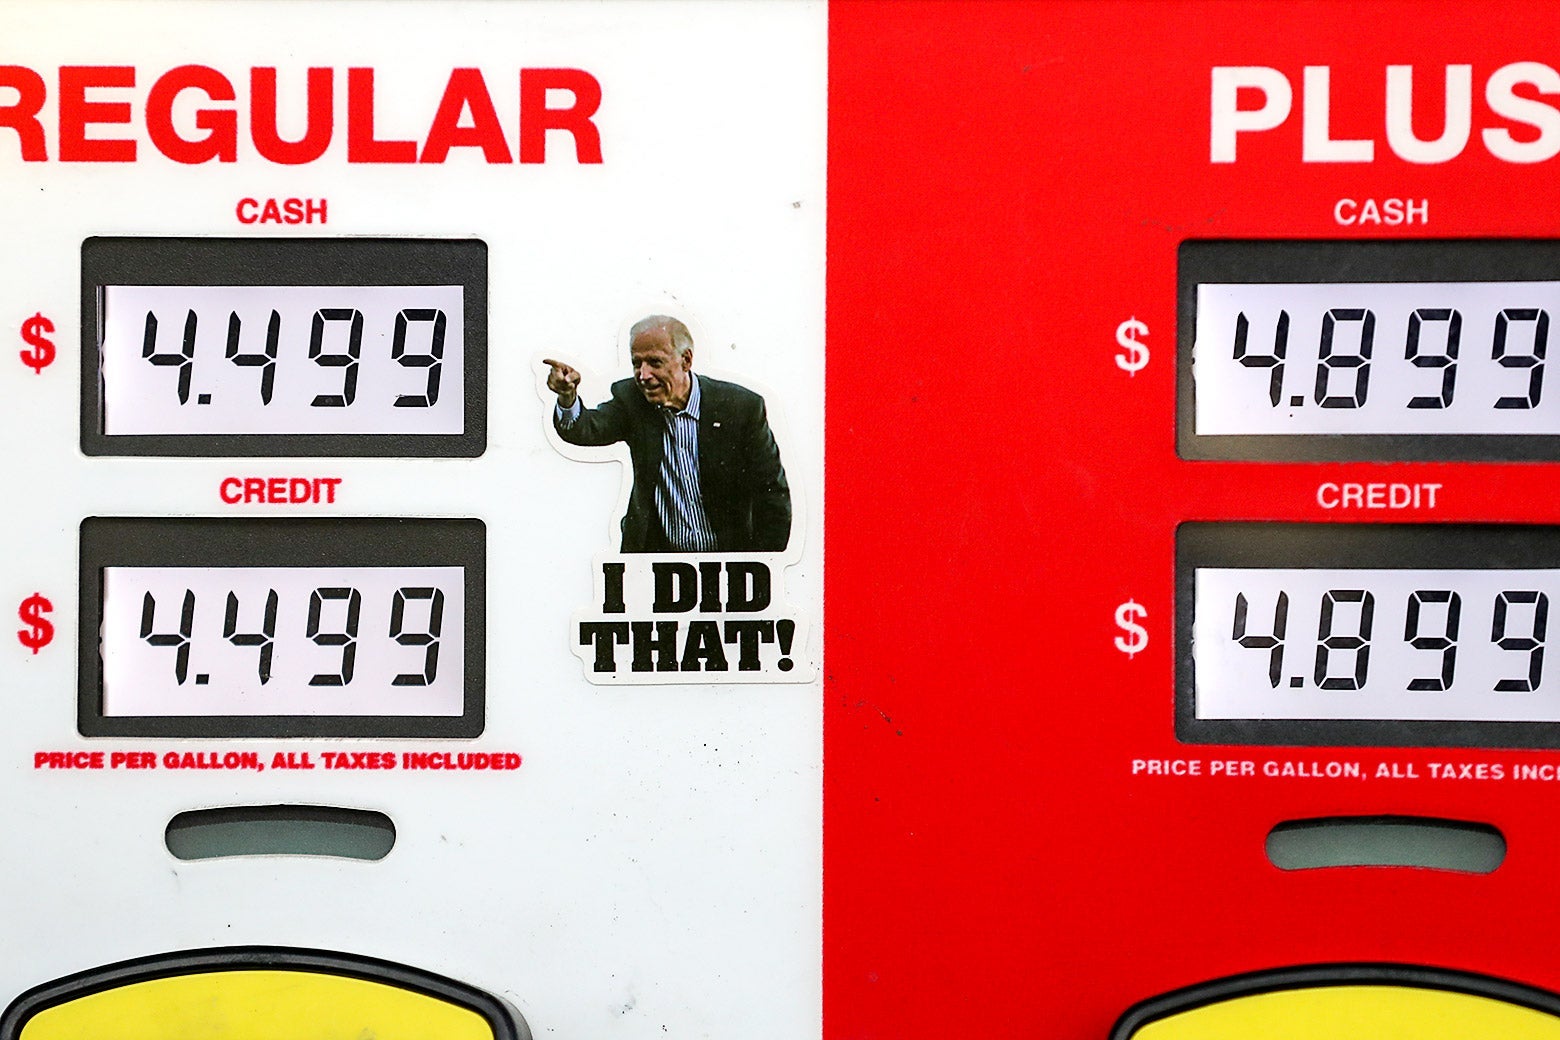 Joe Biden Gas Prices The Story Behind The “i Did That” Stickers Everywhere